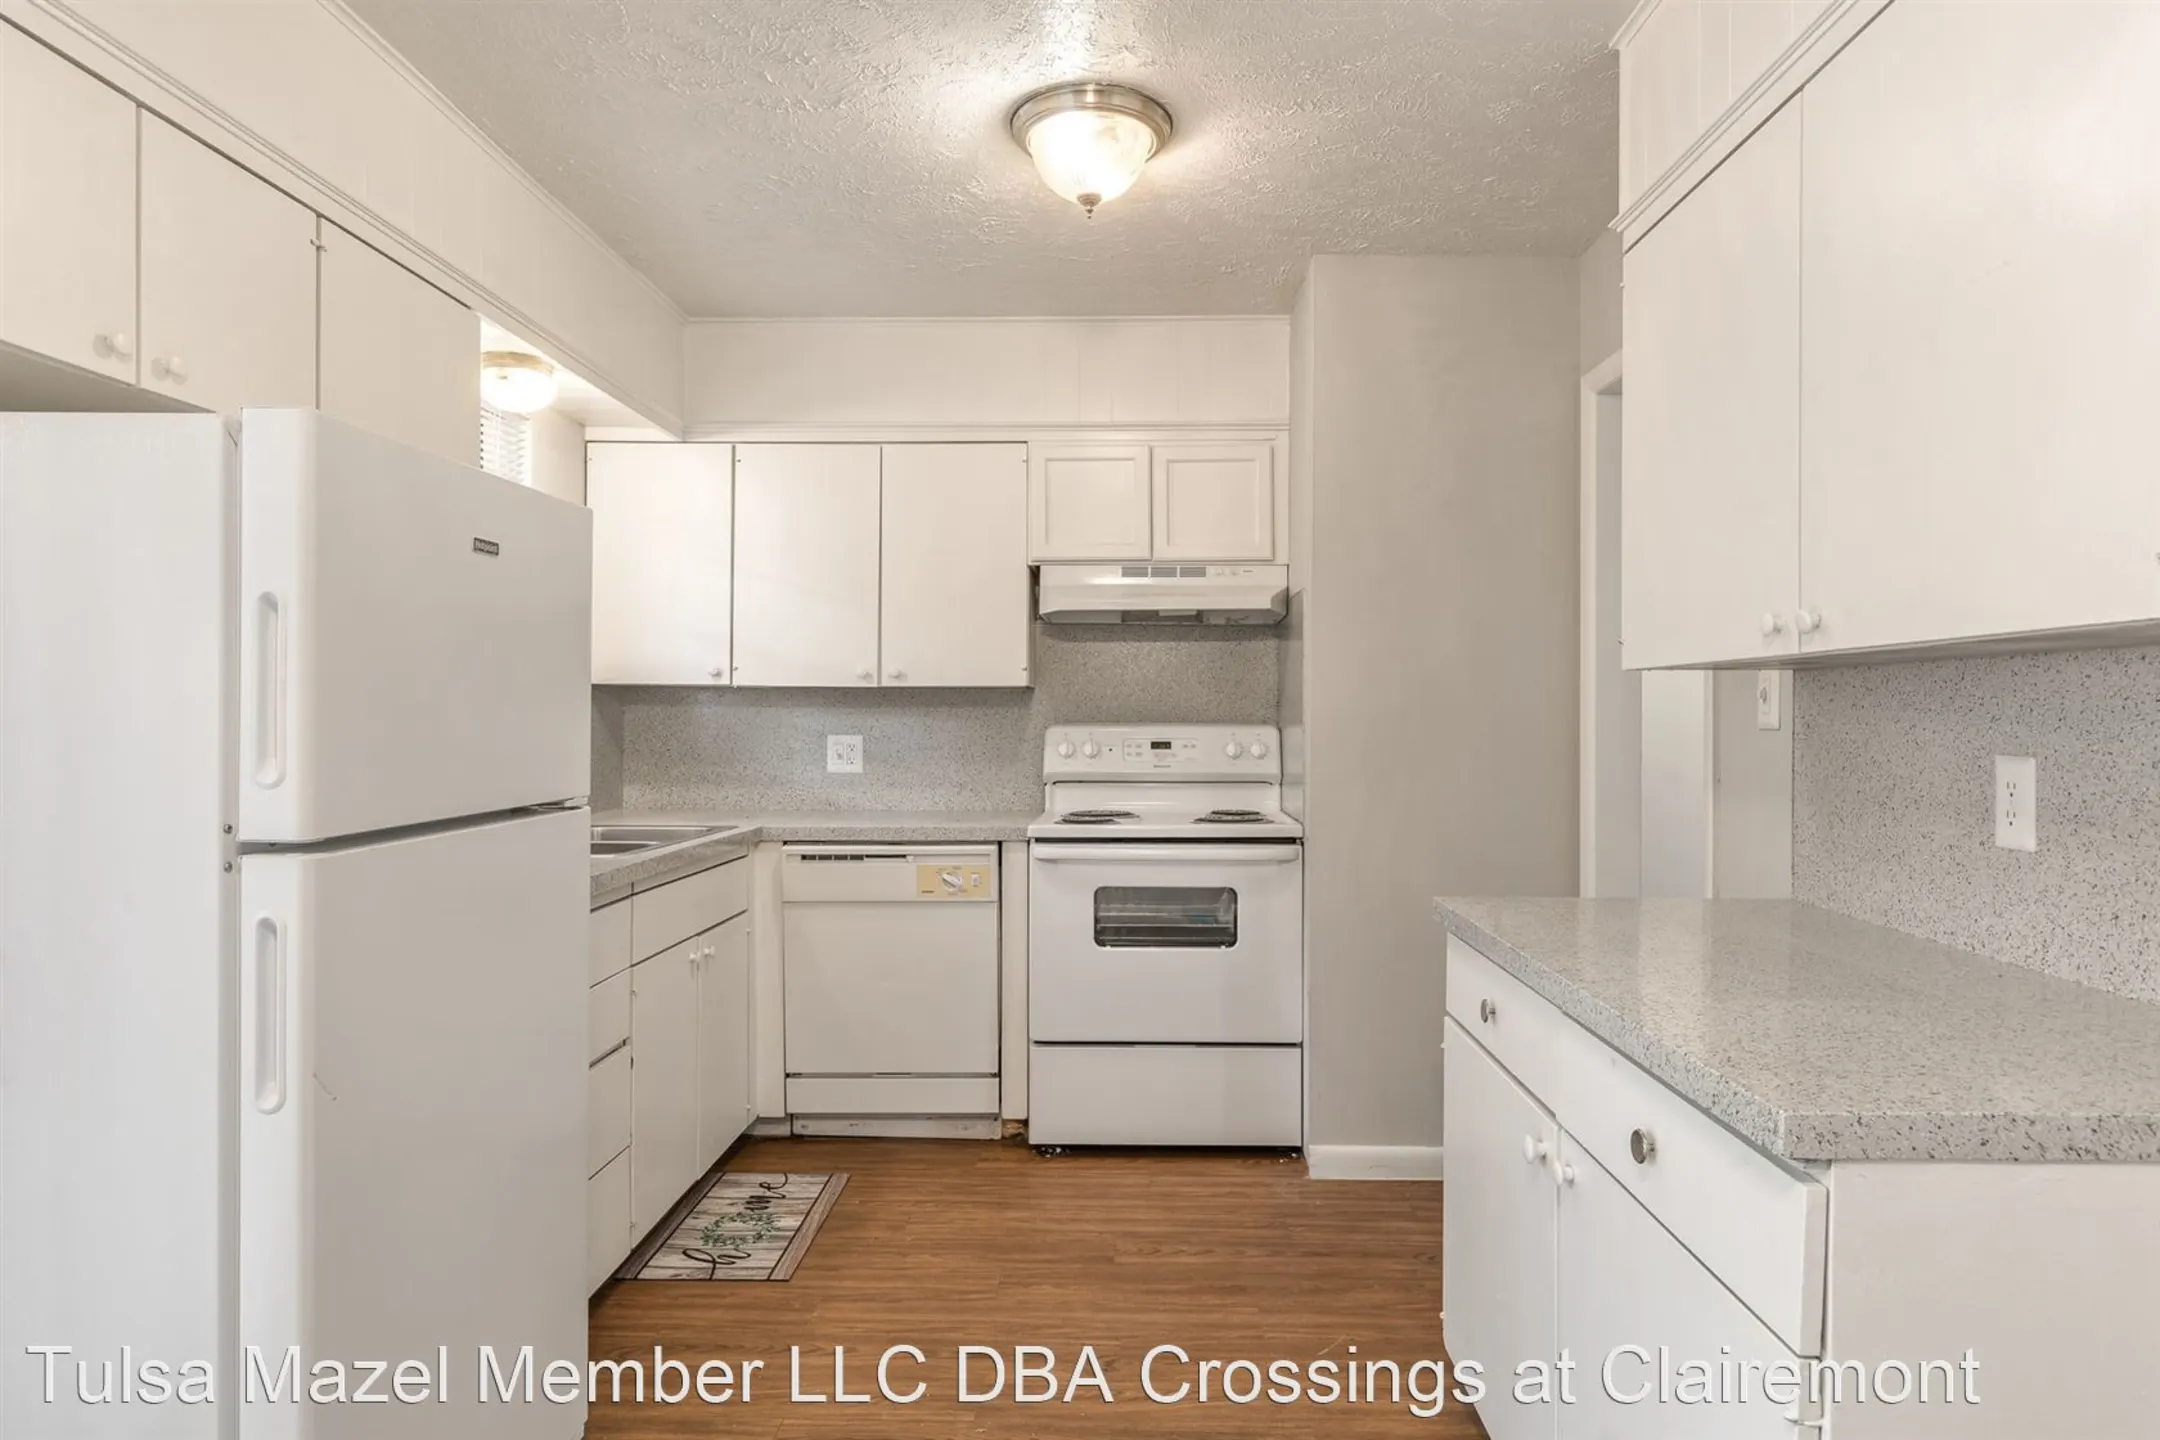 Kitchen - Crossings at Clairemont - Tulsa, OK